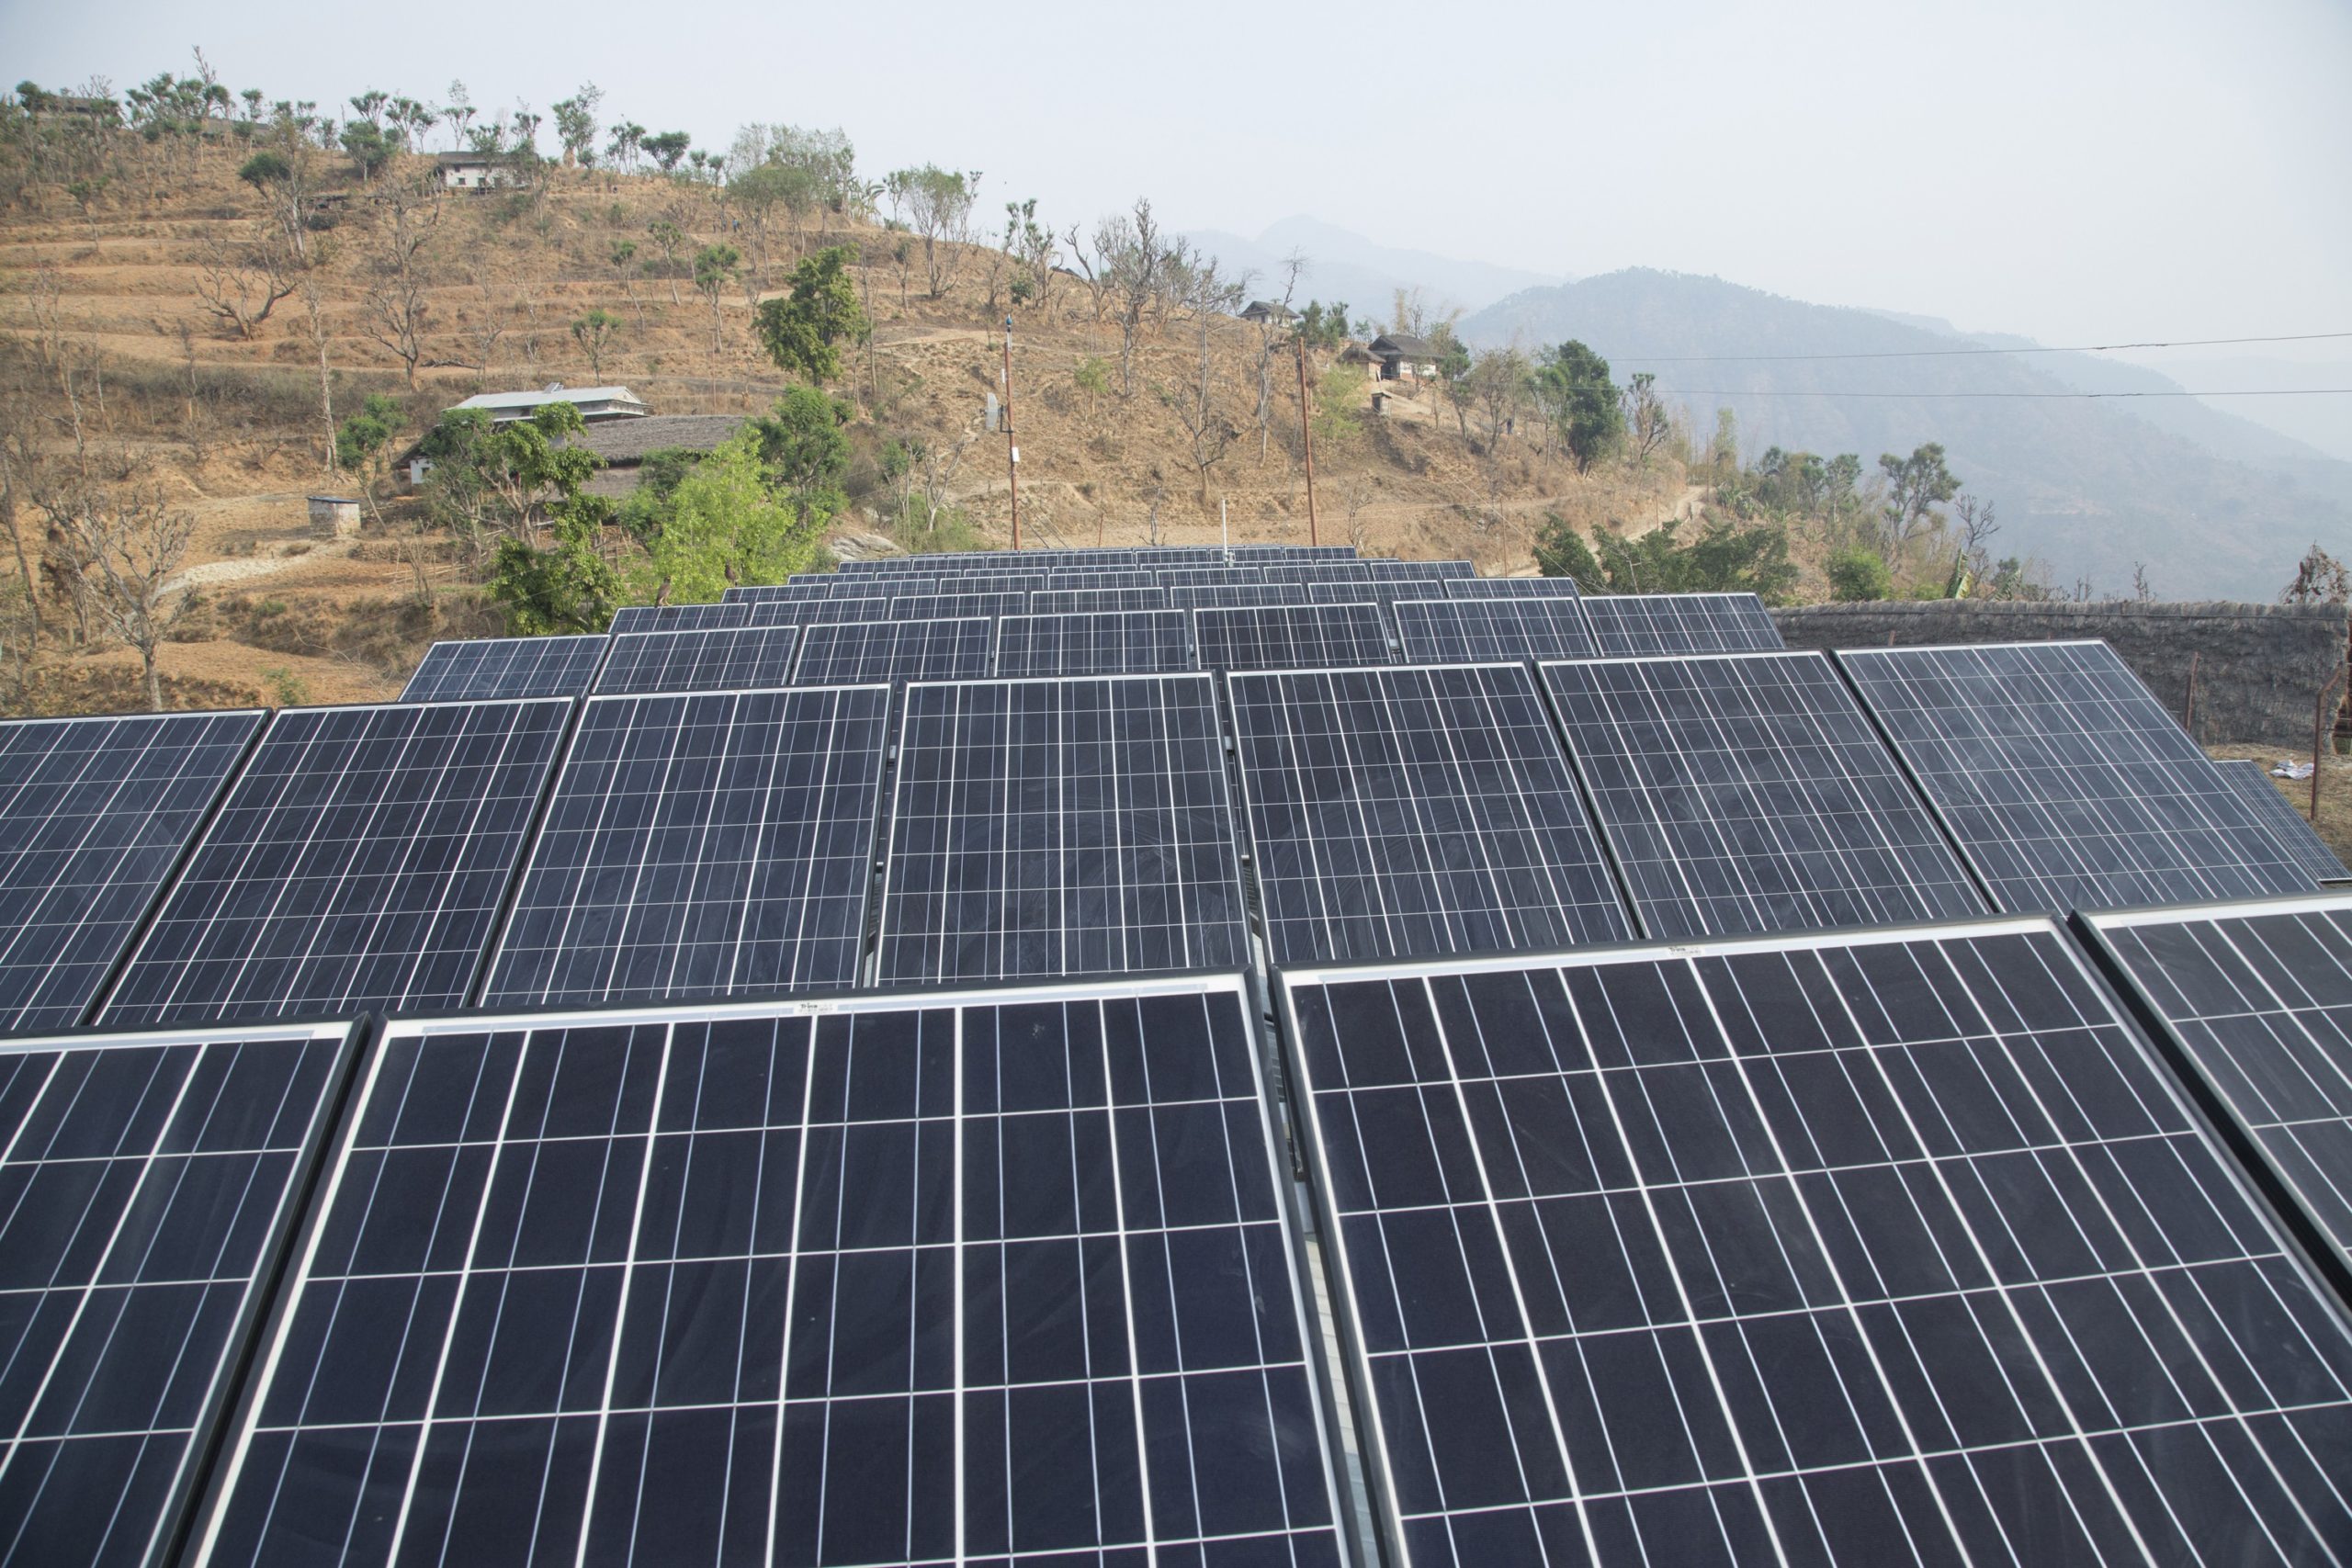 Solar energy attracting investors, 11 projects granted permission for survey